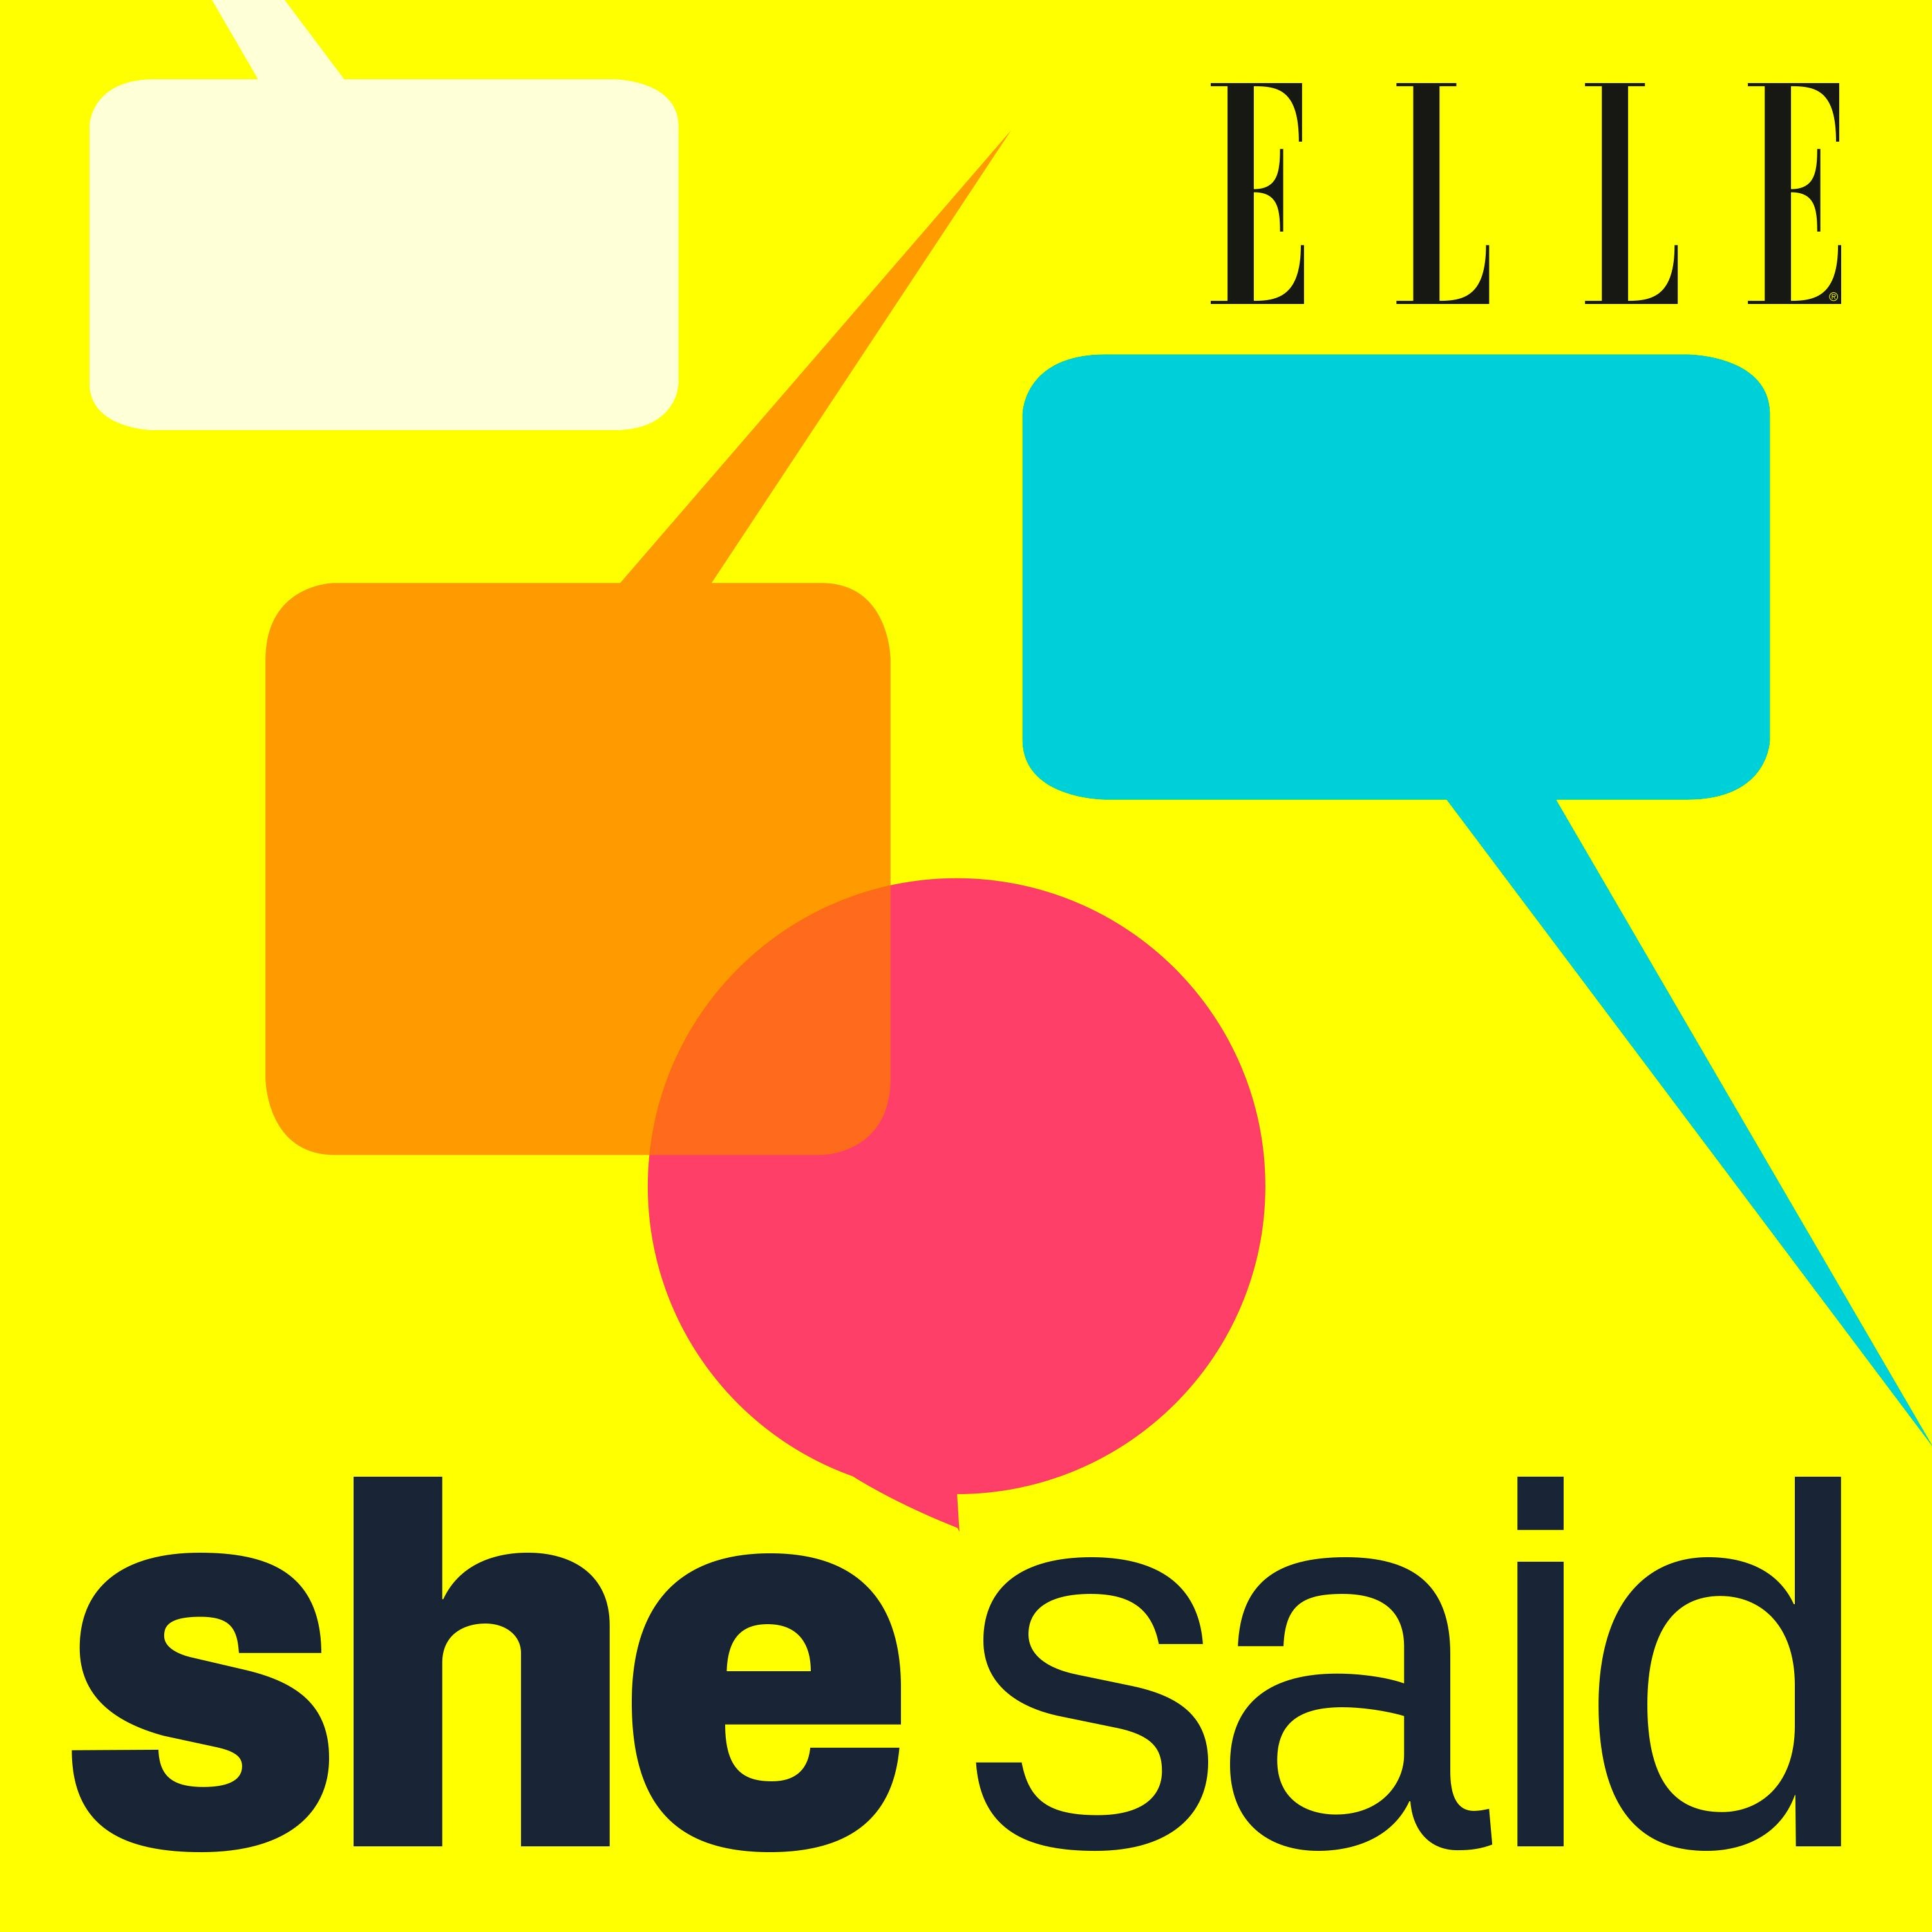 Episode 1: ELLE UK Editor’s Letter By Lorraine Candy